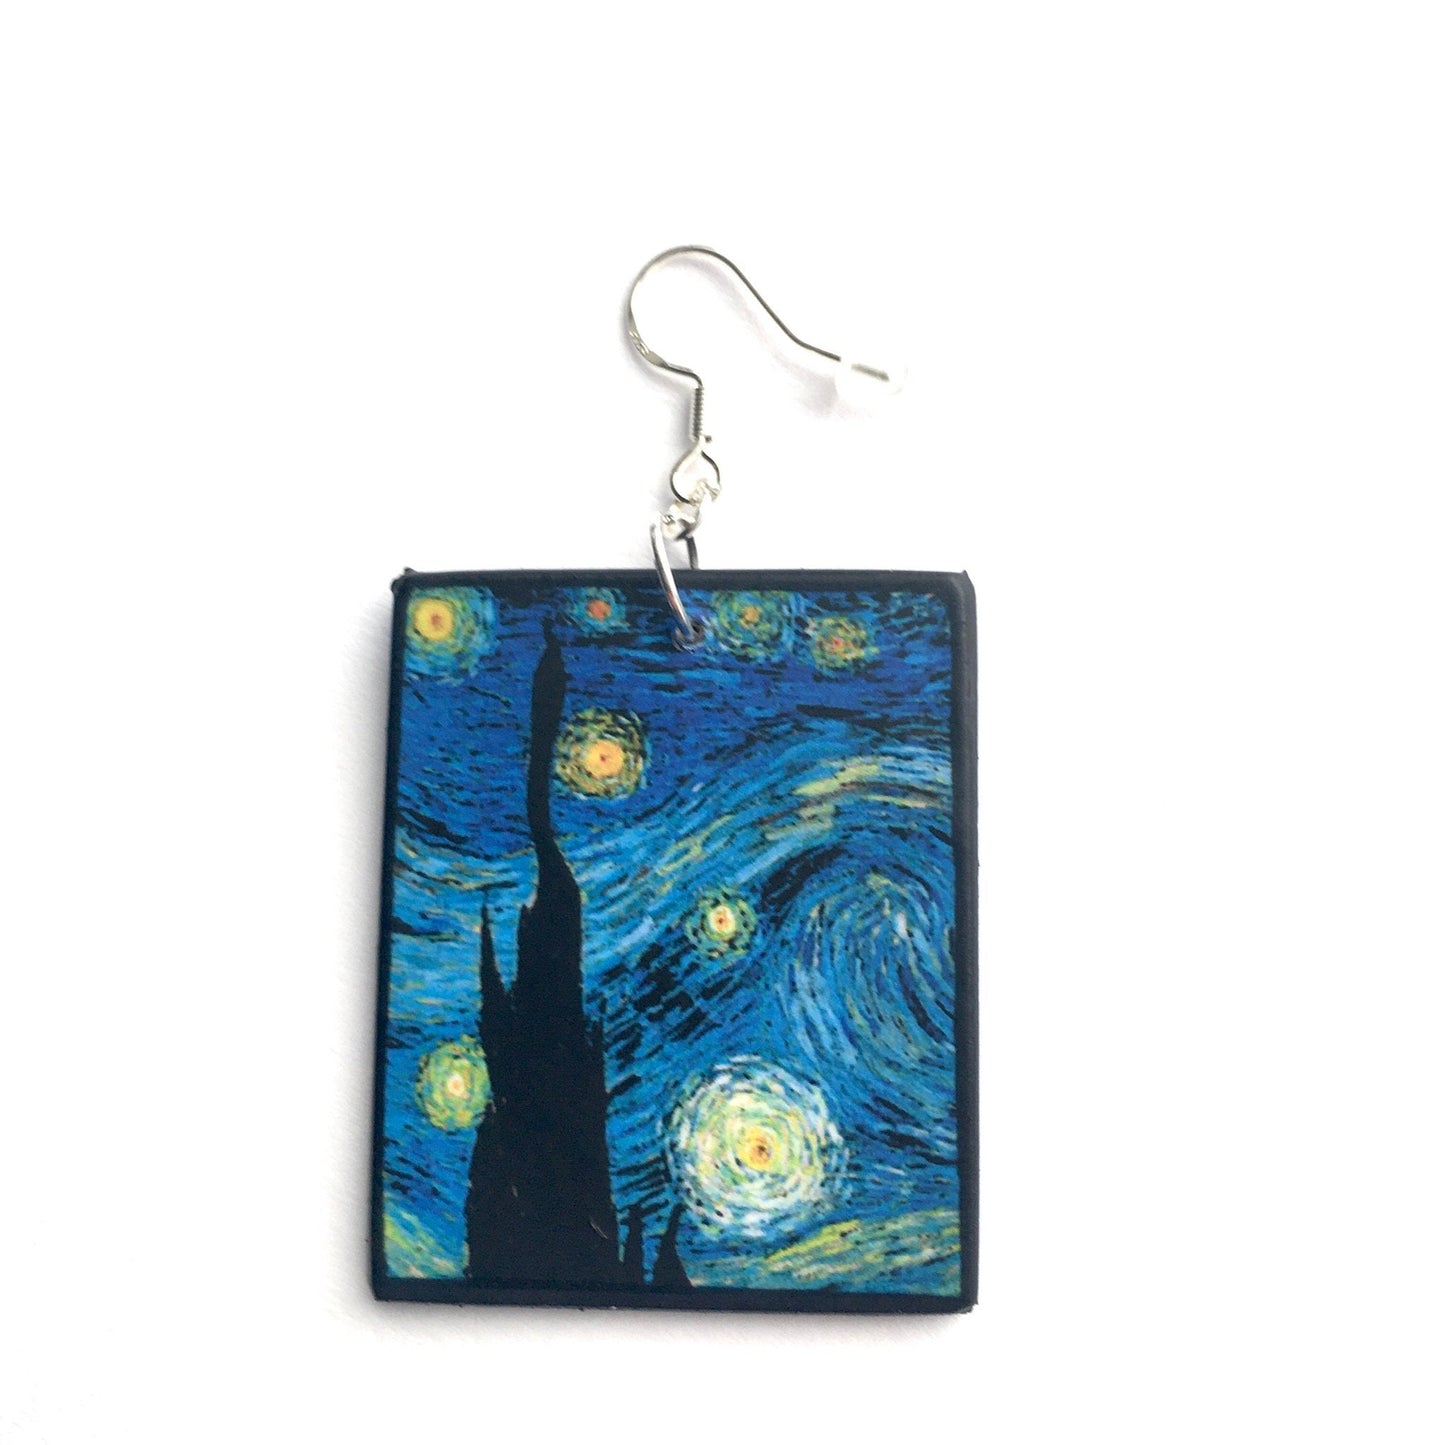 Vincent van Gogh, Starry Night, sustainable fashion, wood and sterling silver, art earrings,